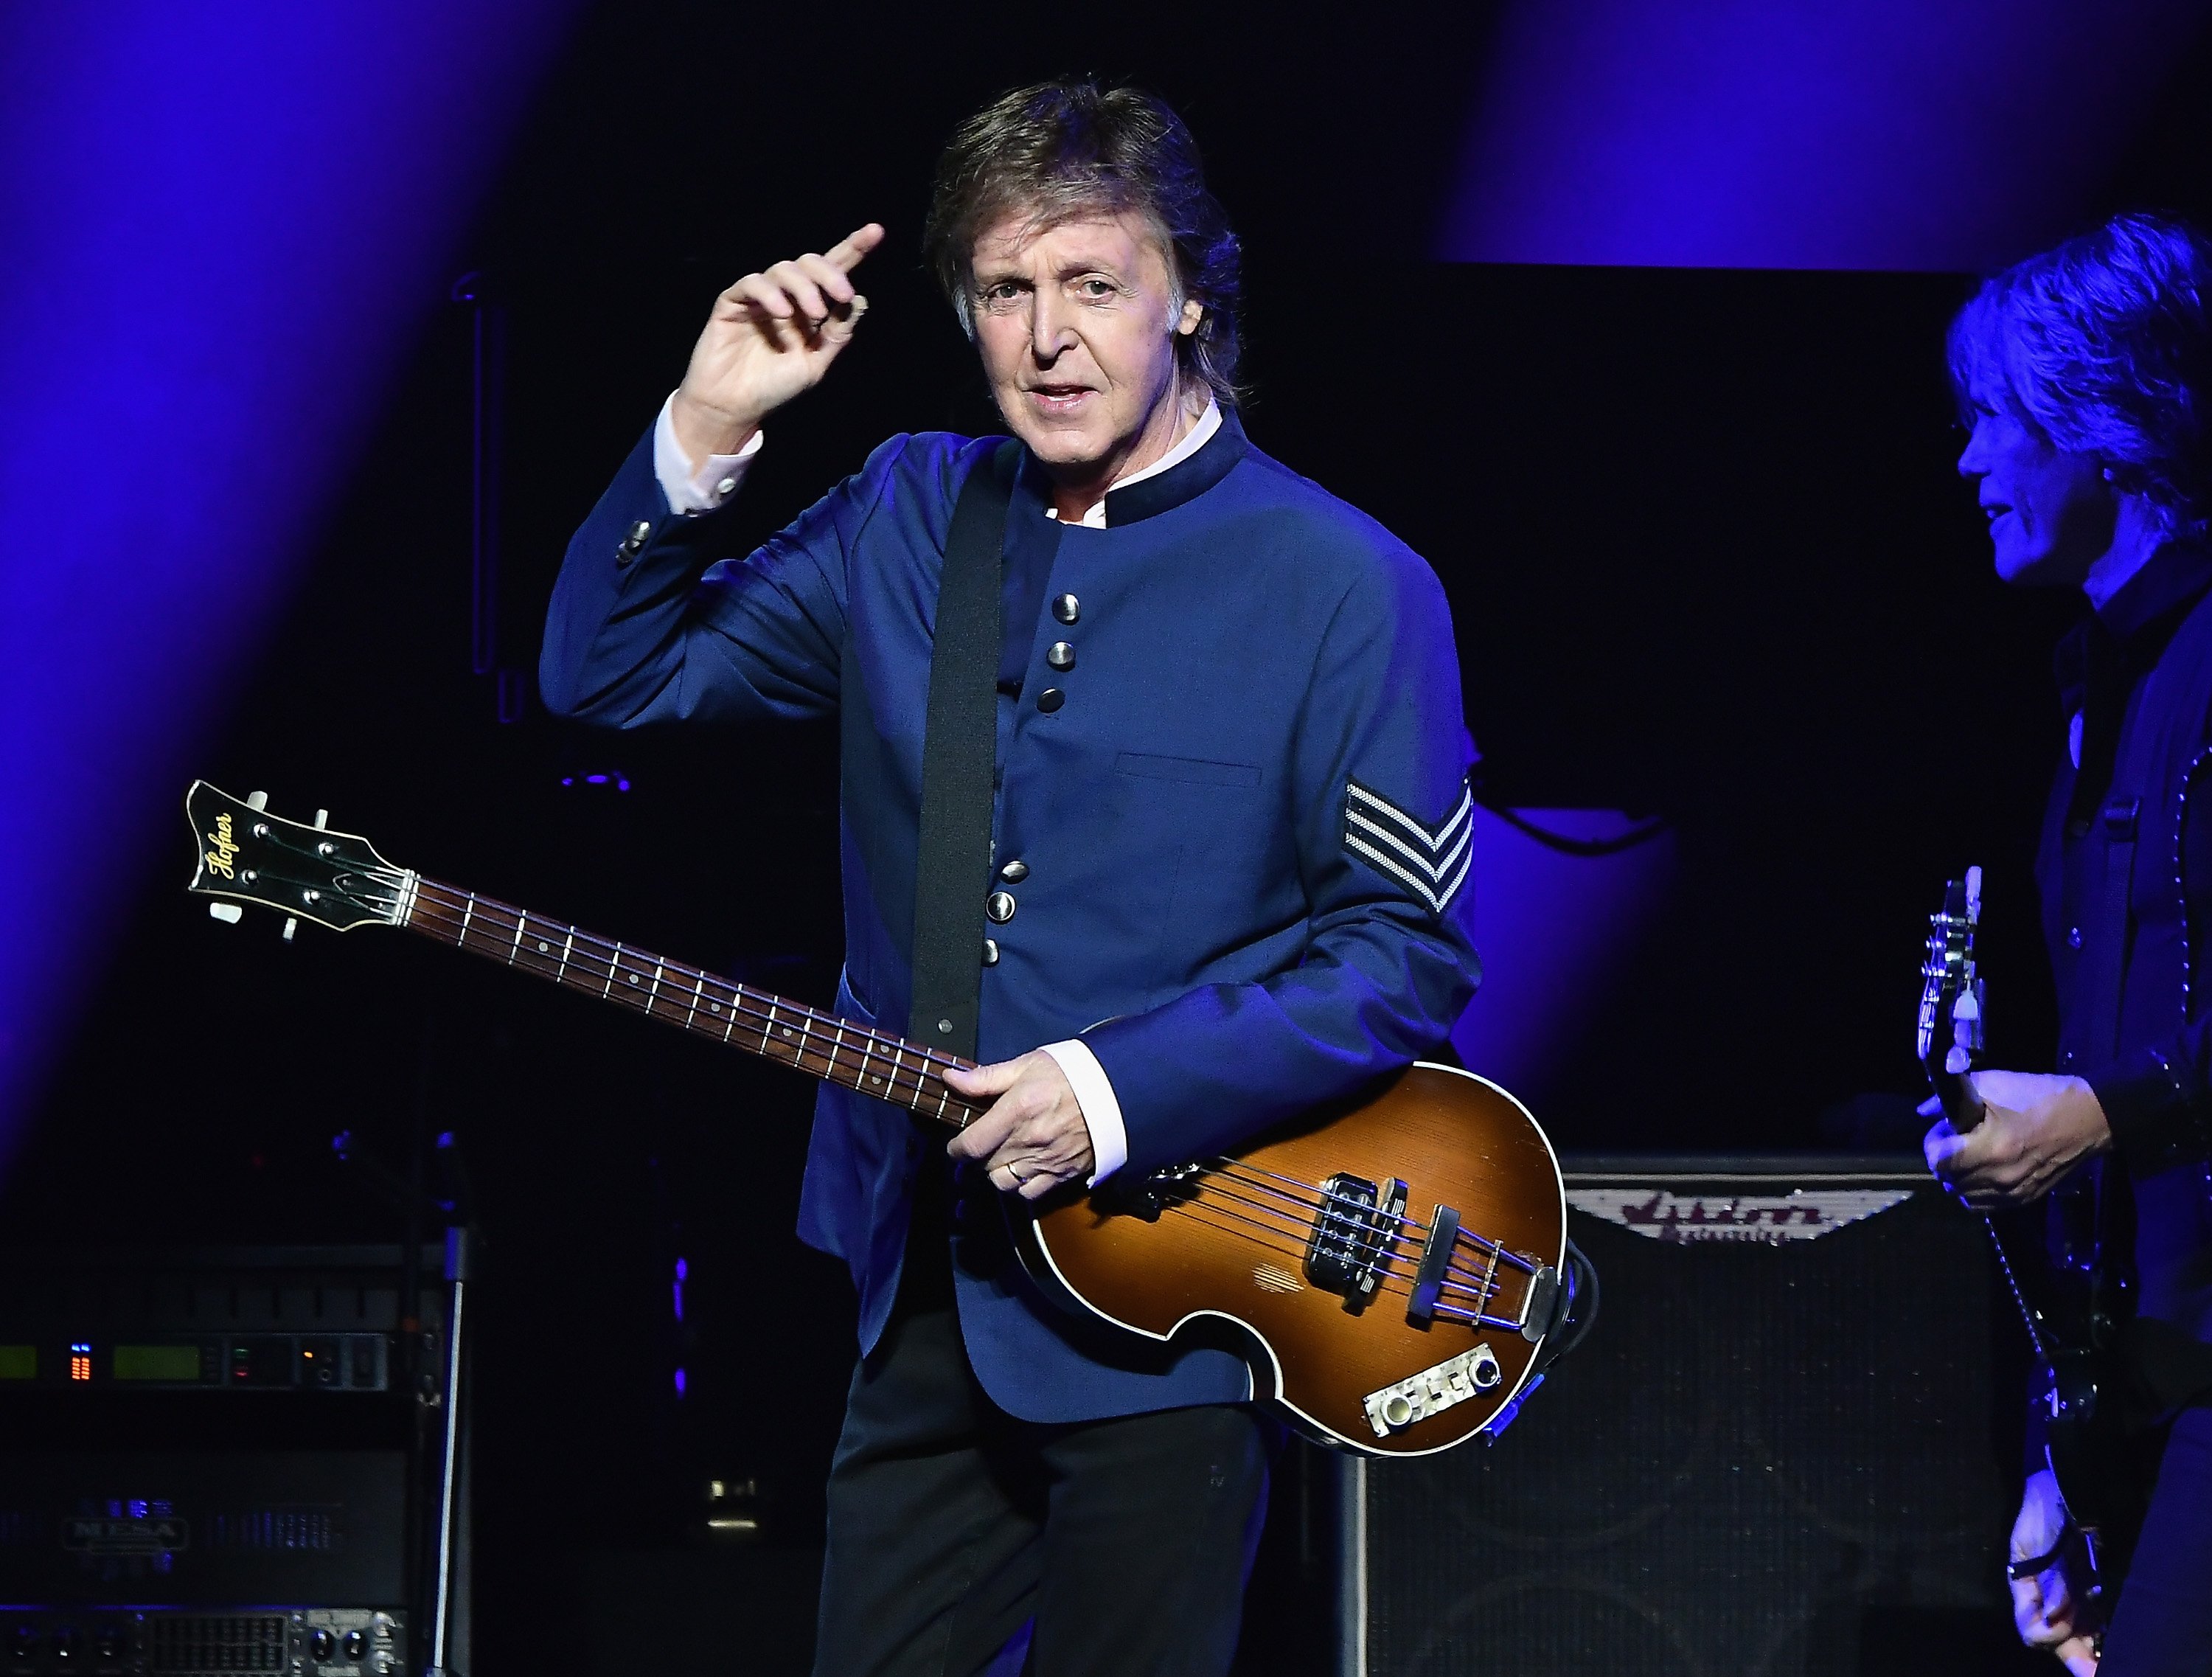 Paul McCartney performs at American Airlines Arena in Miami, Florida